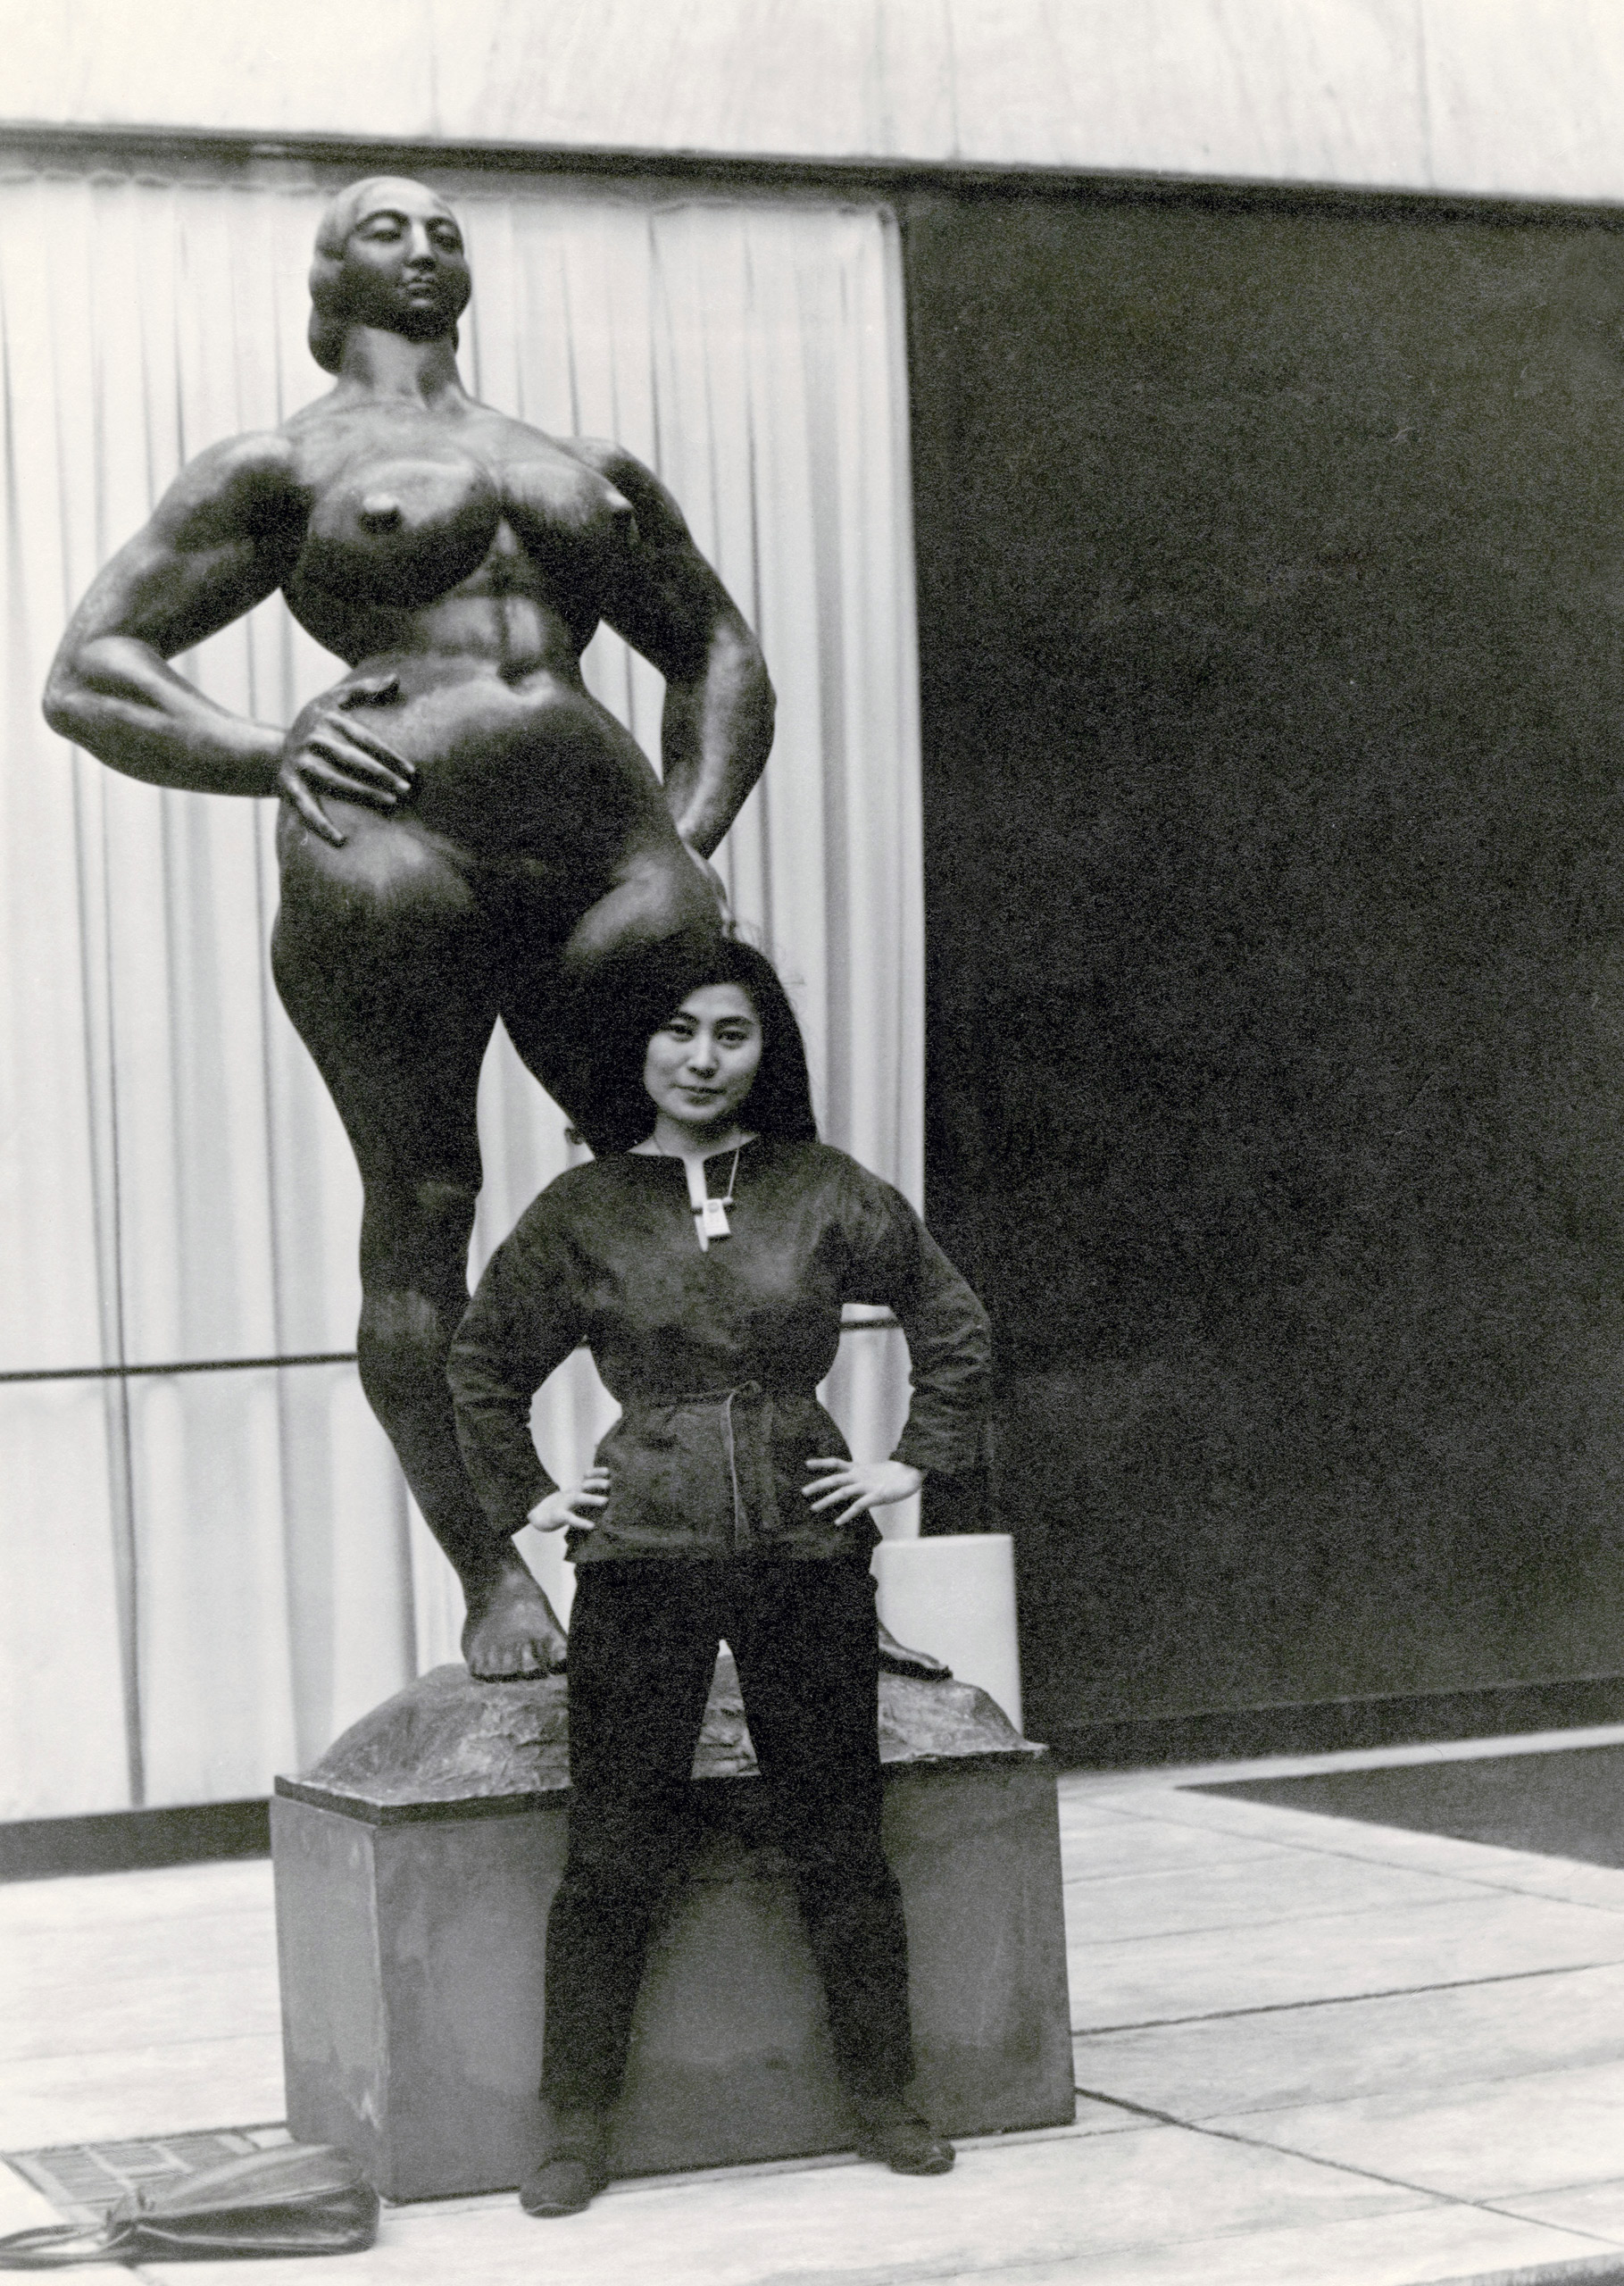 Yoko Ono with Standing Woman (1932) by Gaston Lachaise, The Museum of Modern Art Sculpture Garden, New York. c. 1960–61.